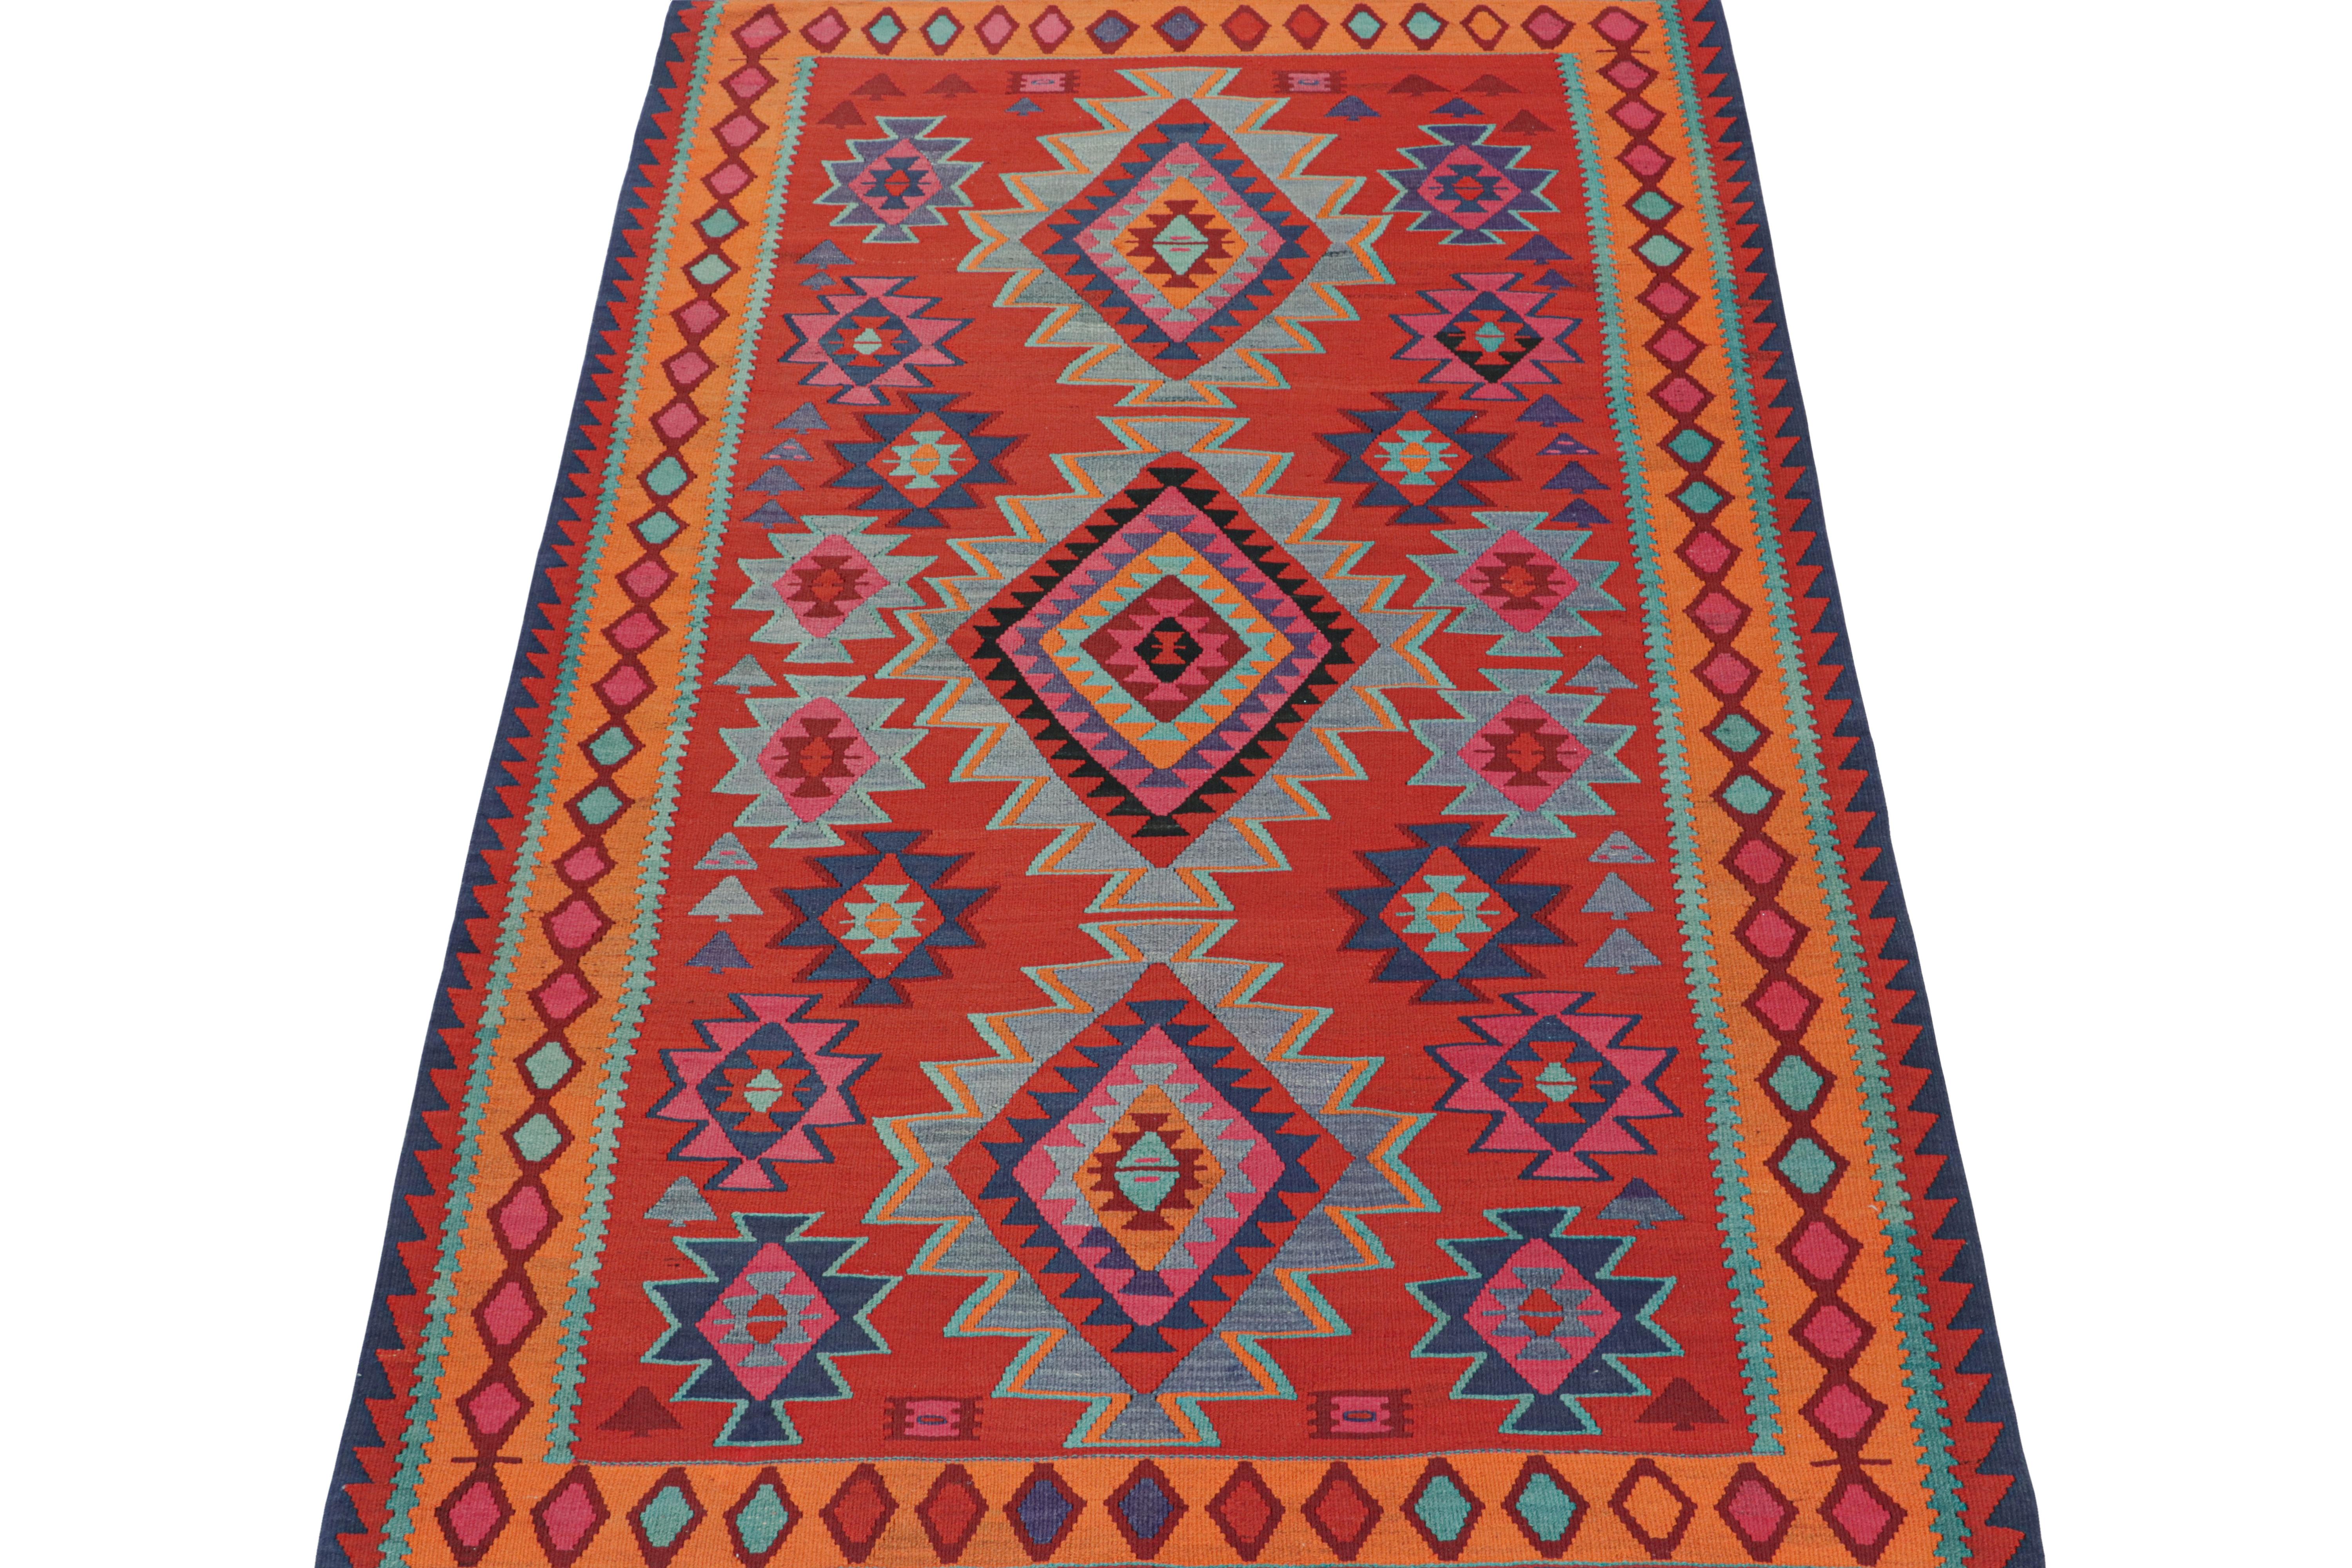 This vintage 6x9 Persian Kilim is handwoven in wool and originates circa 1950-1960. This Kilim is believed to hail from Meshkin—a small village known for its craft among what connoisseurs call 